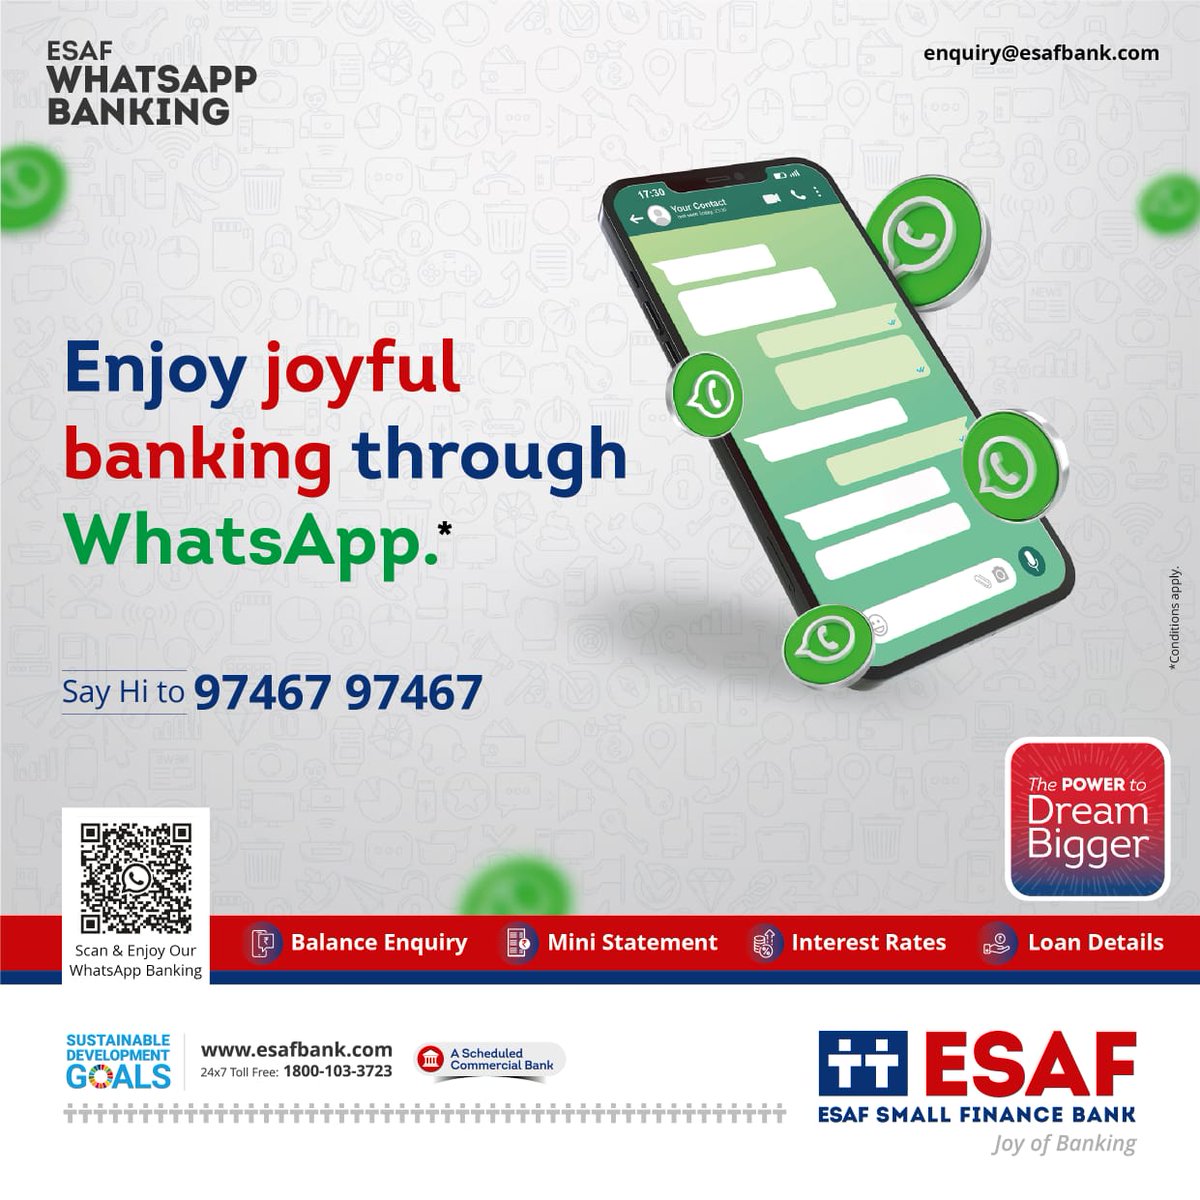 Enjoy joyful banking services through WhatsApp. Avail hassle-free banking services with ESAF Small Finance Bank’s WhatsApp Banking. #thepowertodreambigger #ESAFBank #JoyOfBanking #WhatsAppBanking